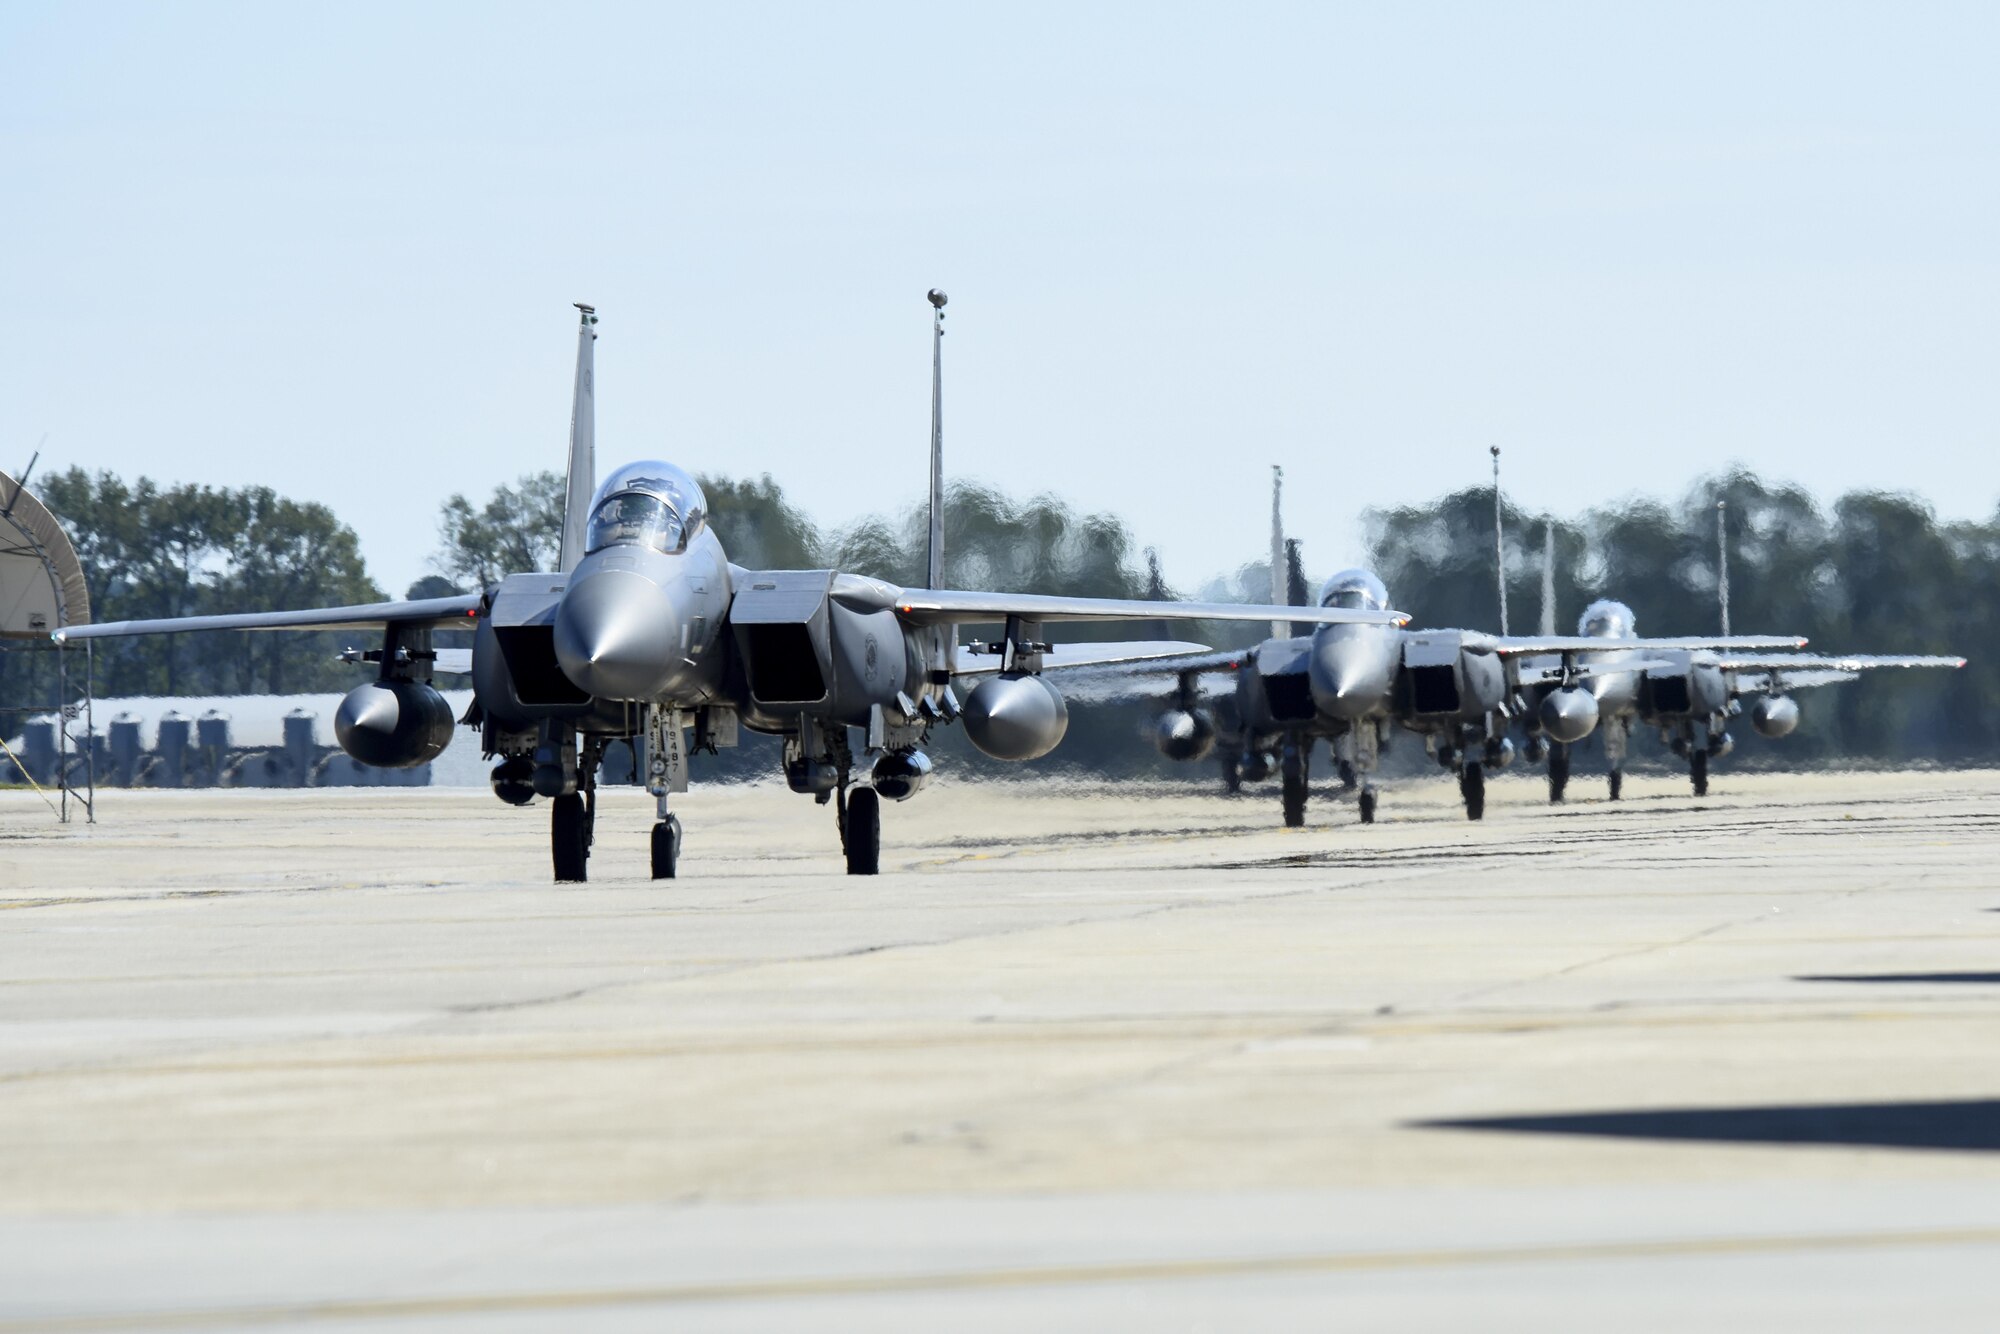 Three F-15E Strikes Eagles, from the 335th Fighter Squadron, return from deployment, Oct. 12, 2016, at Seymour Johnson Air Force Base, North Carolina. More than 10 aircraft returned from an undisclosed location in Southwest Asia where they provided support for OPERATION INHERENT RESOLVE. (U.S. Air Force photo by Airman Shawna L. Keyes)